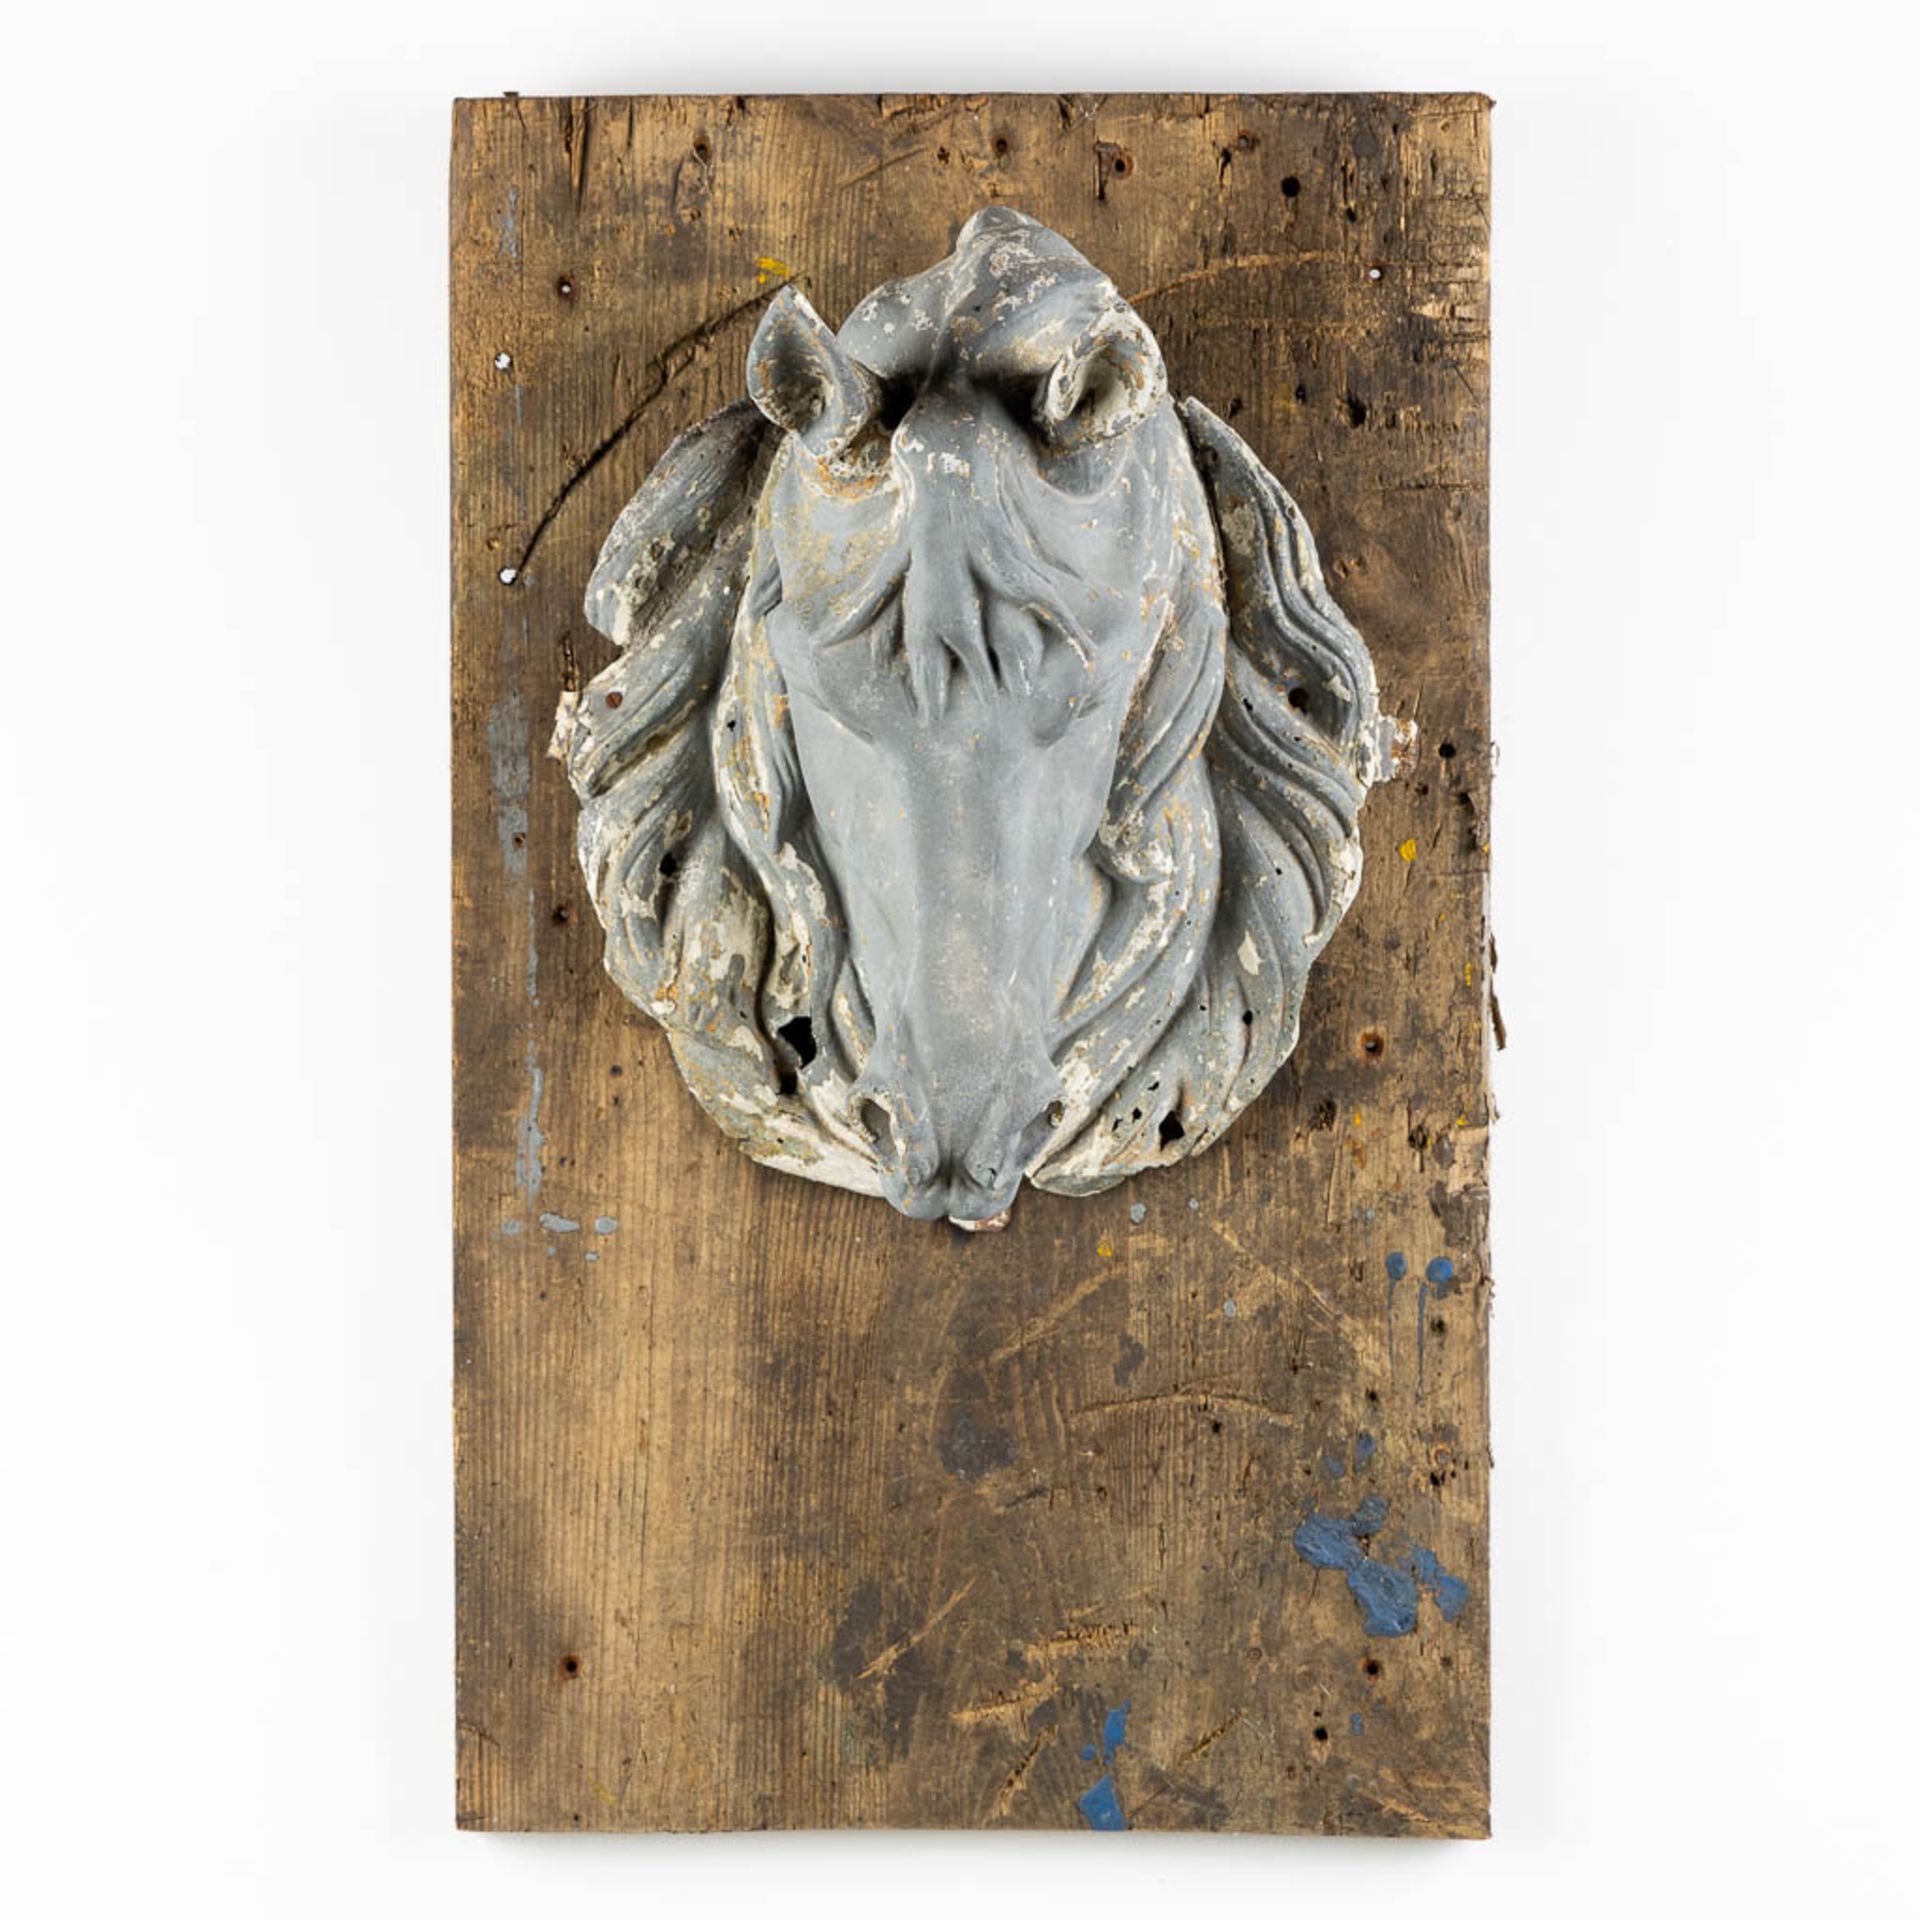 An antique zinc Horse Head, mounted on a wood board. Circa 1920. (L:40 x W:39 x H:44 cm) - Image 3 of 13